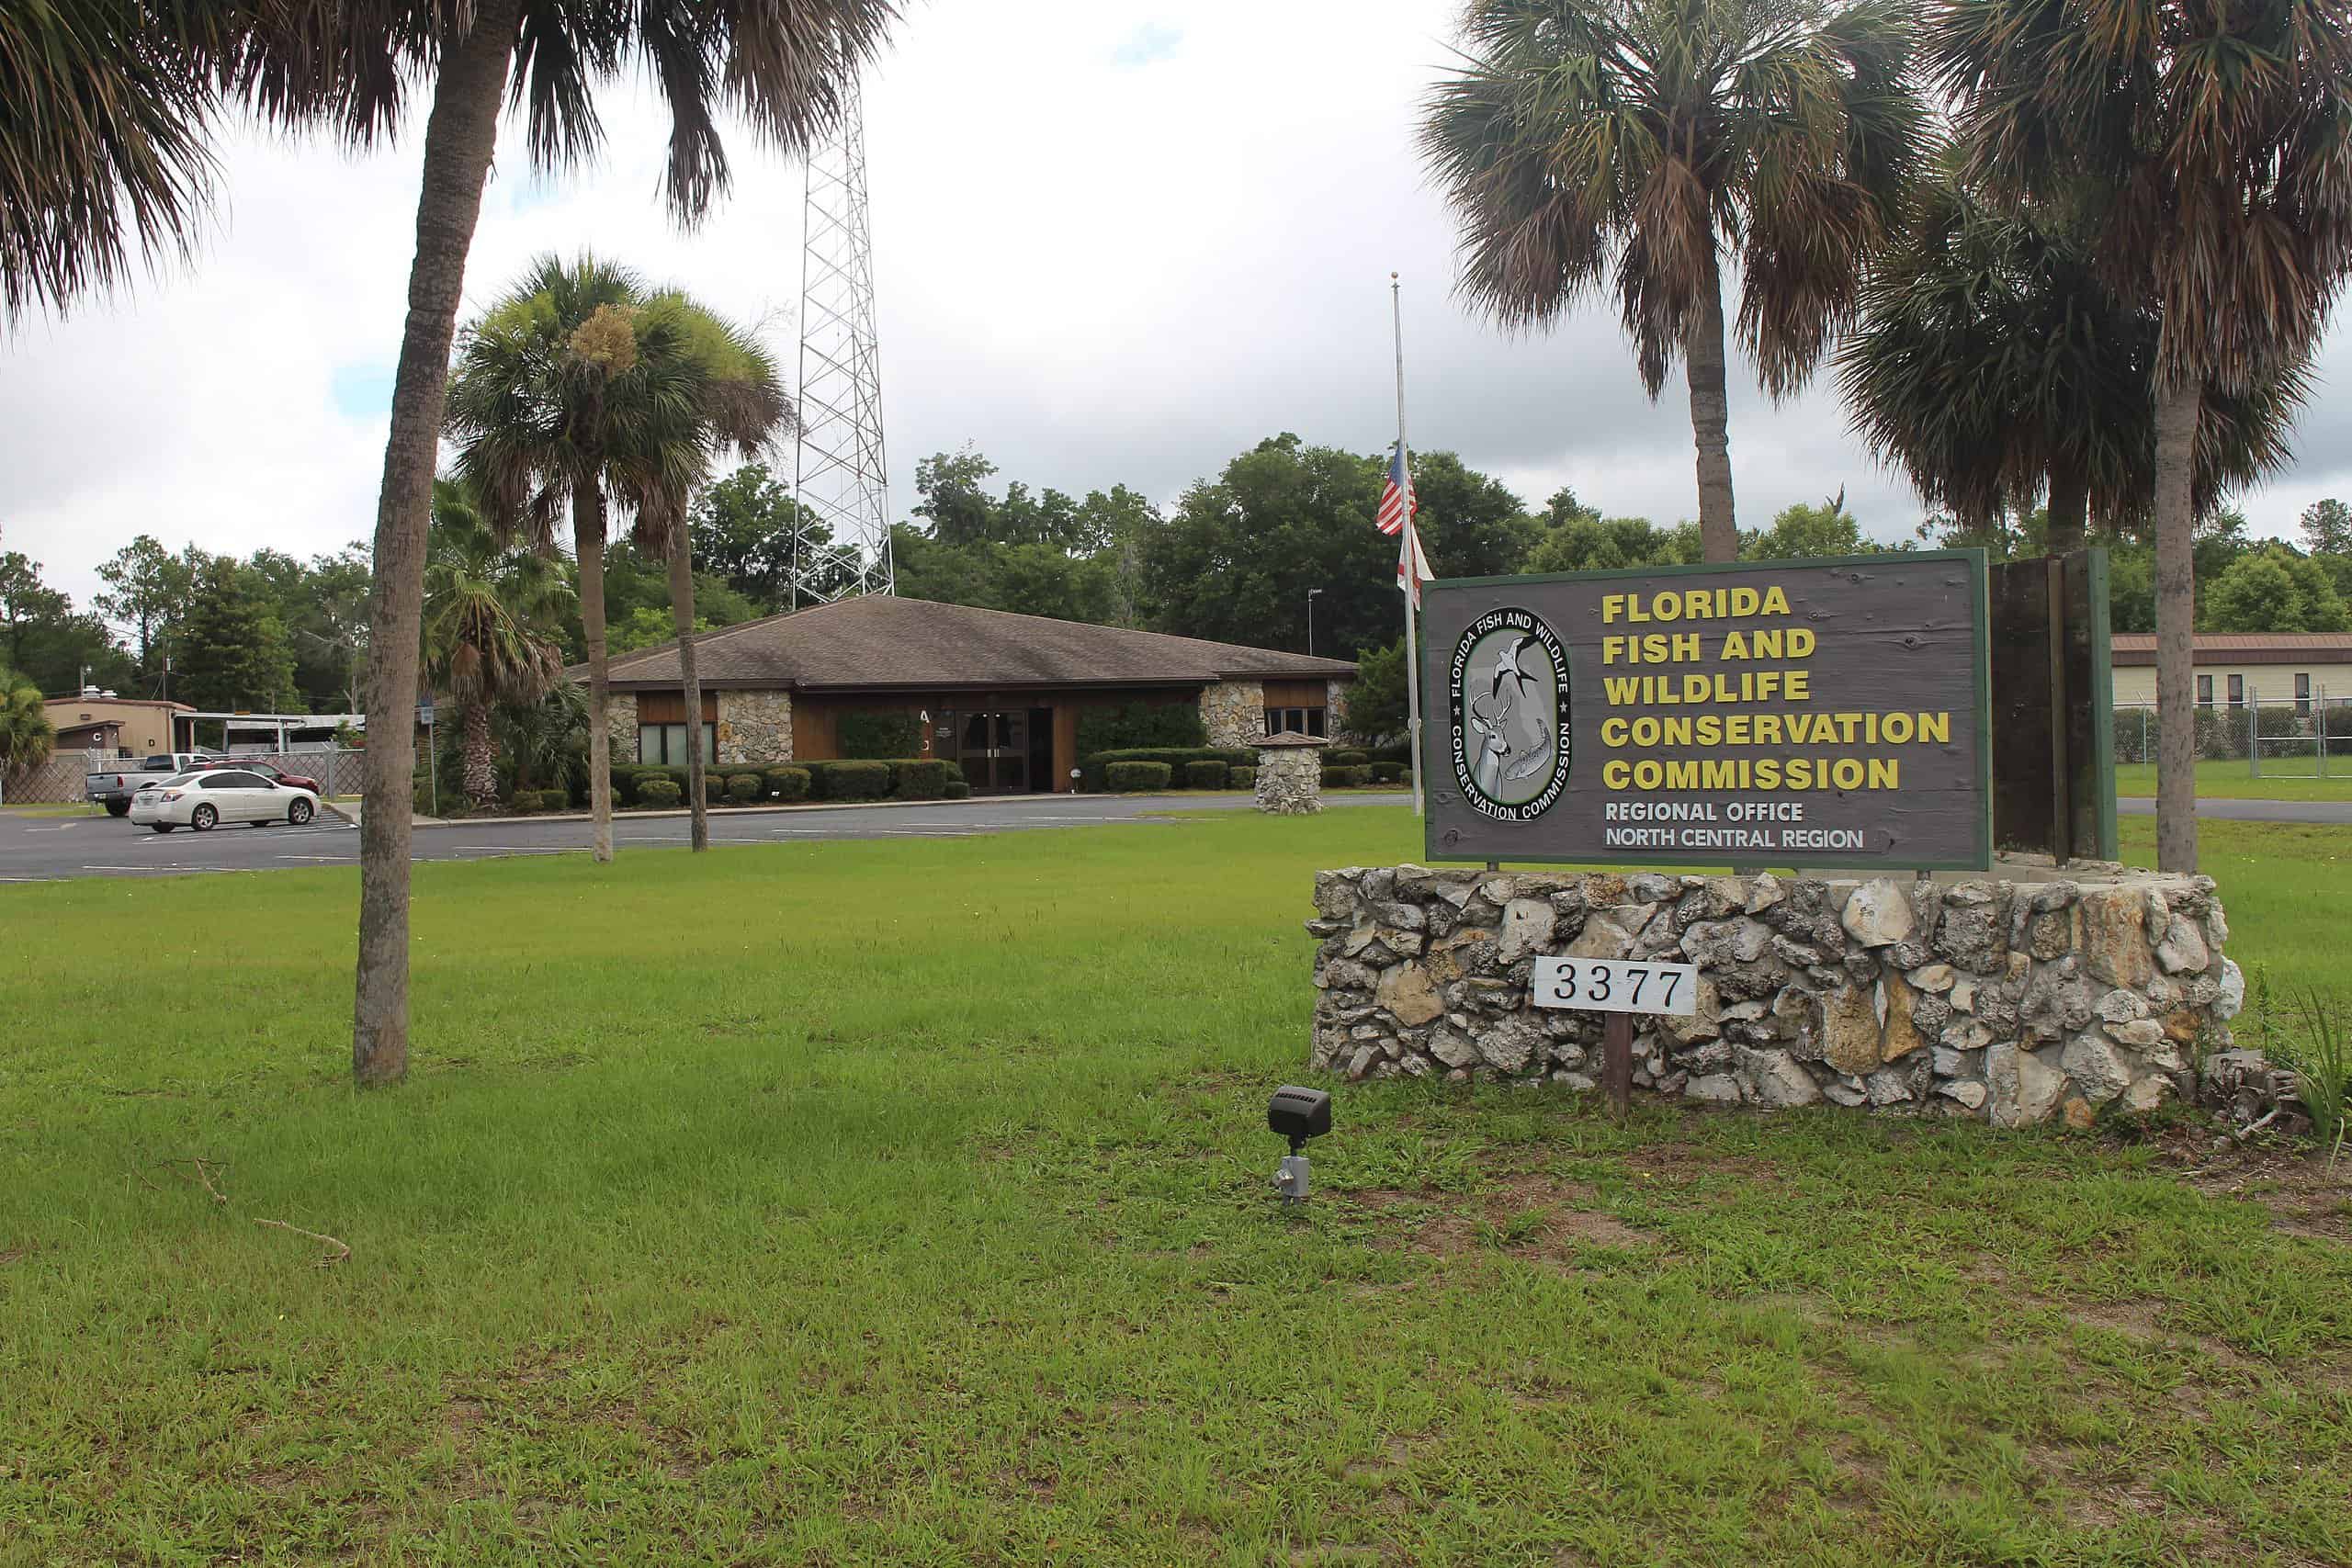 Florida Fish and Wildlife Conservation Commission, Regional Office North Central Region